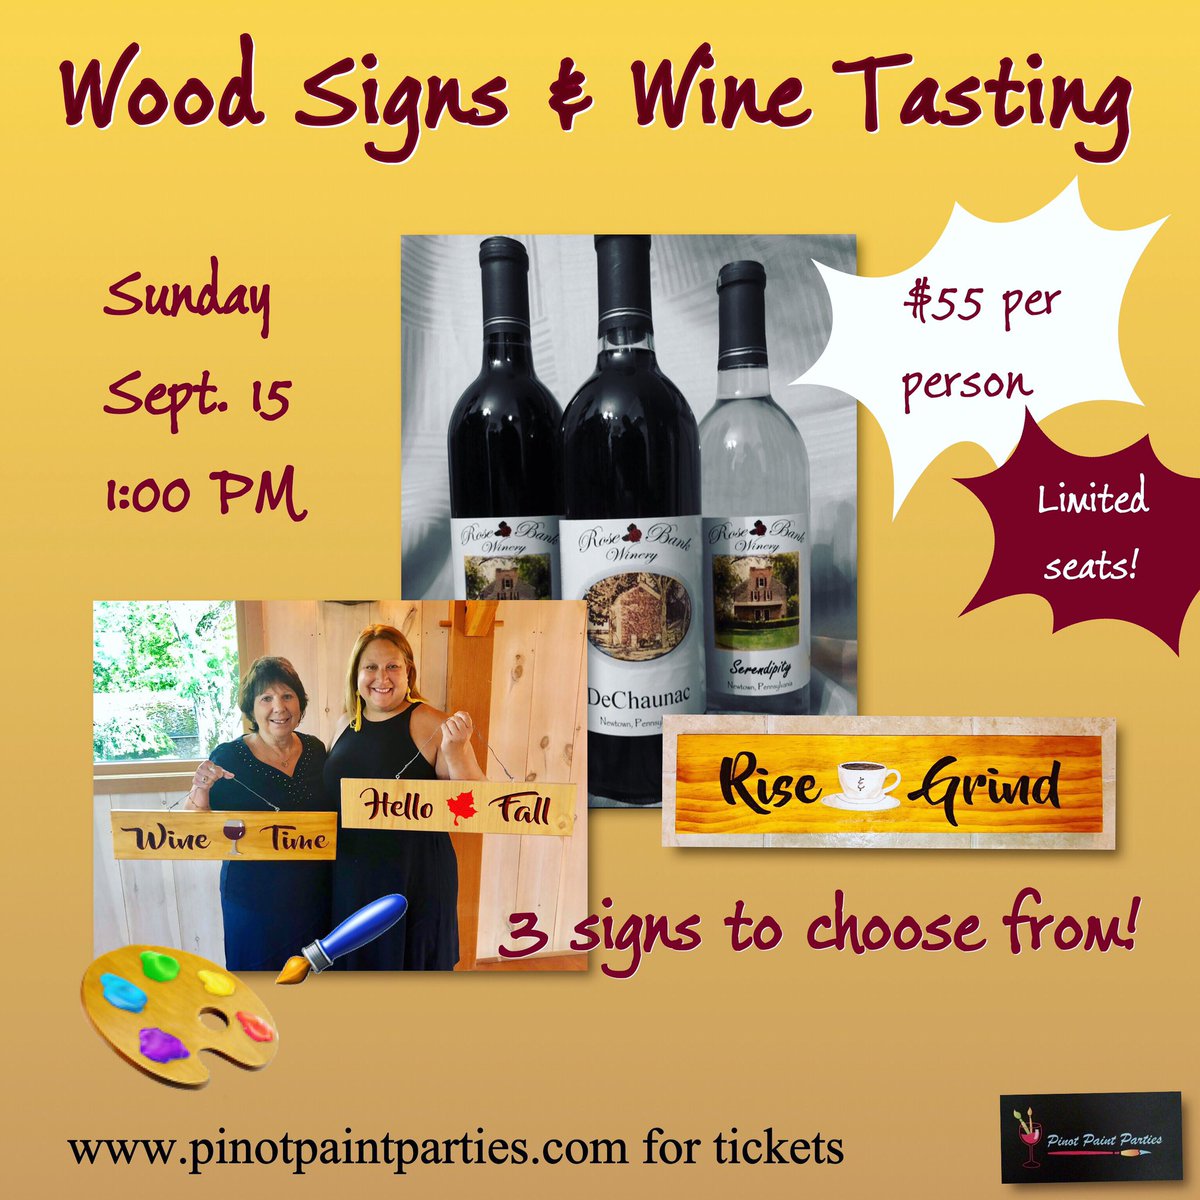 Love wine? Want to make a unique wood sign?  Get at ticket for 9/15 @RoseBankWinery!  Details and tickets on our website. #winetasting #buckscounty #sipandpaint #buckscountywinetrail #thingstodobuckscounty #wineryevent #pinotpaintparties